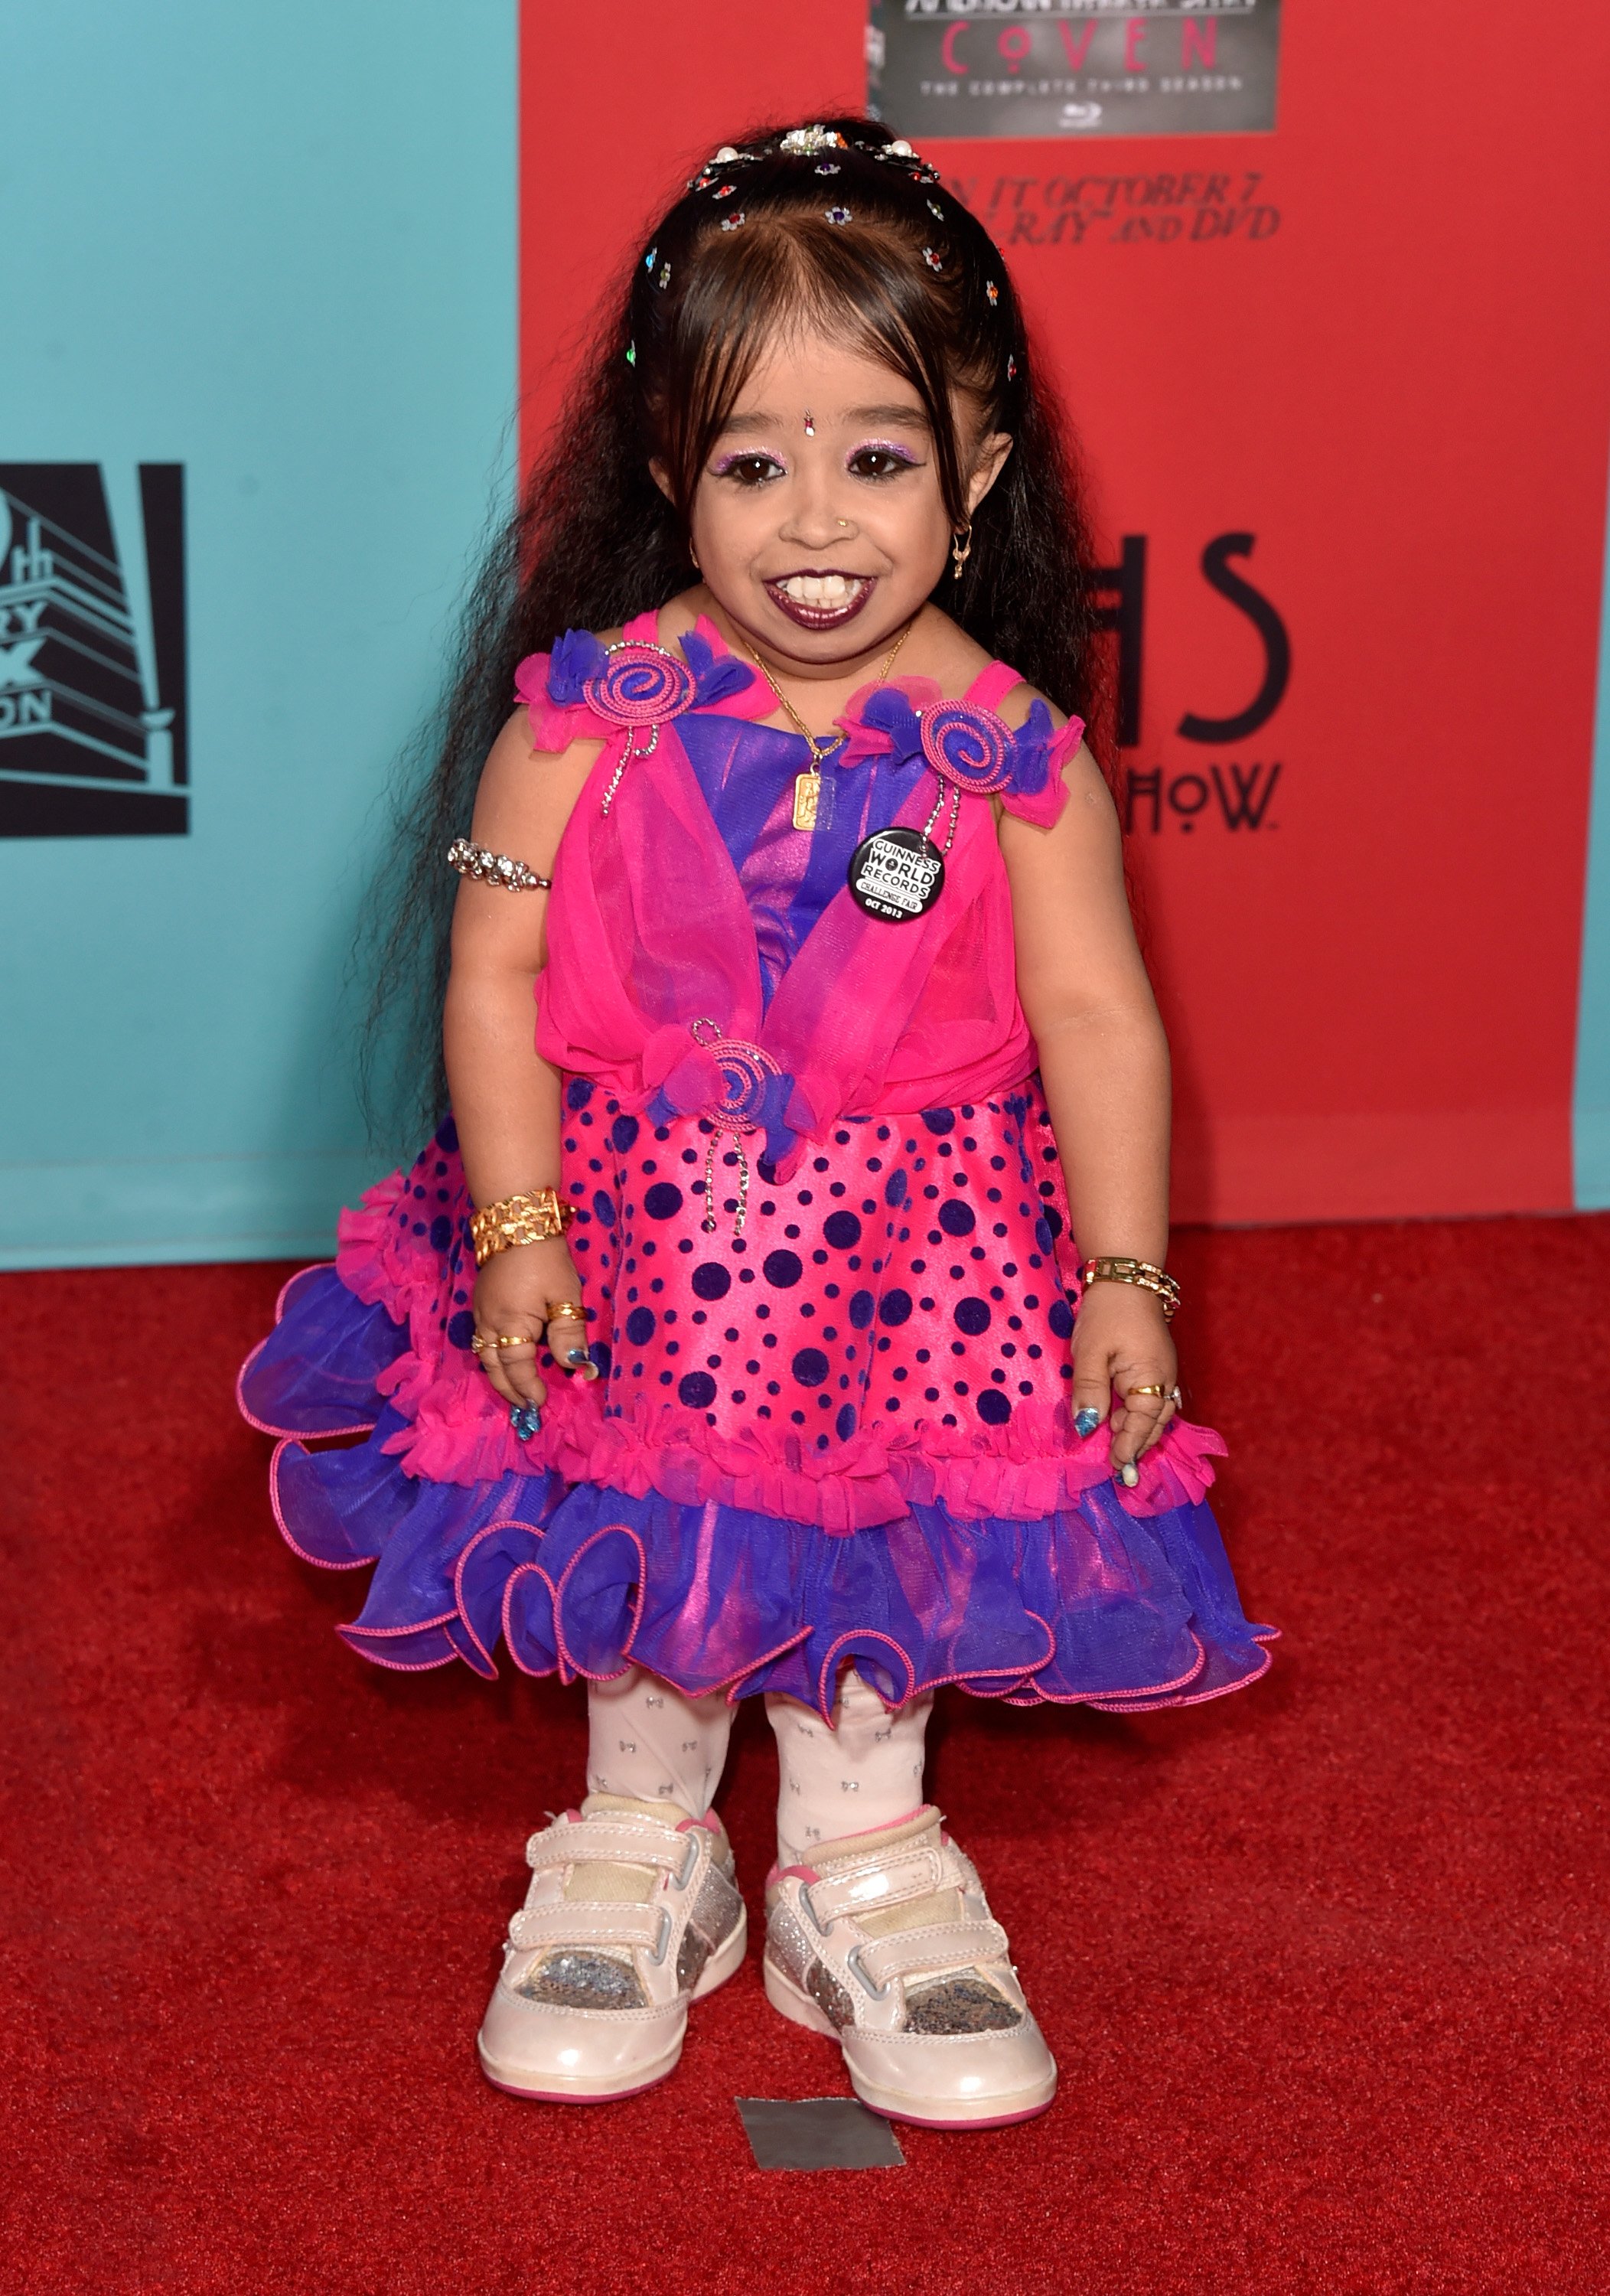 Actress Jyoti Amge attends the premiere screening of FX's "American Horror Story: Freak Show" at TCL Chinese Theatre on October 5, 2014 in Hollywood, California. | Source: Getty Images